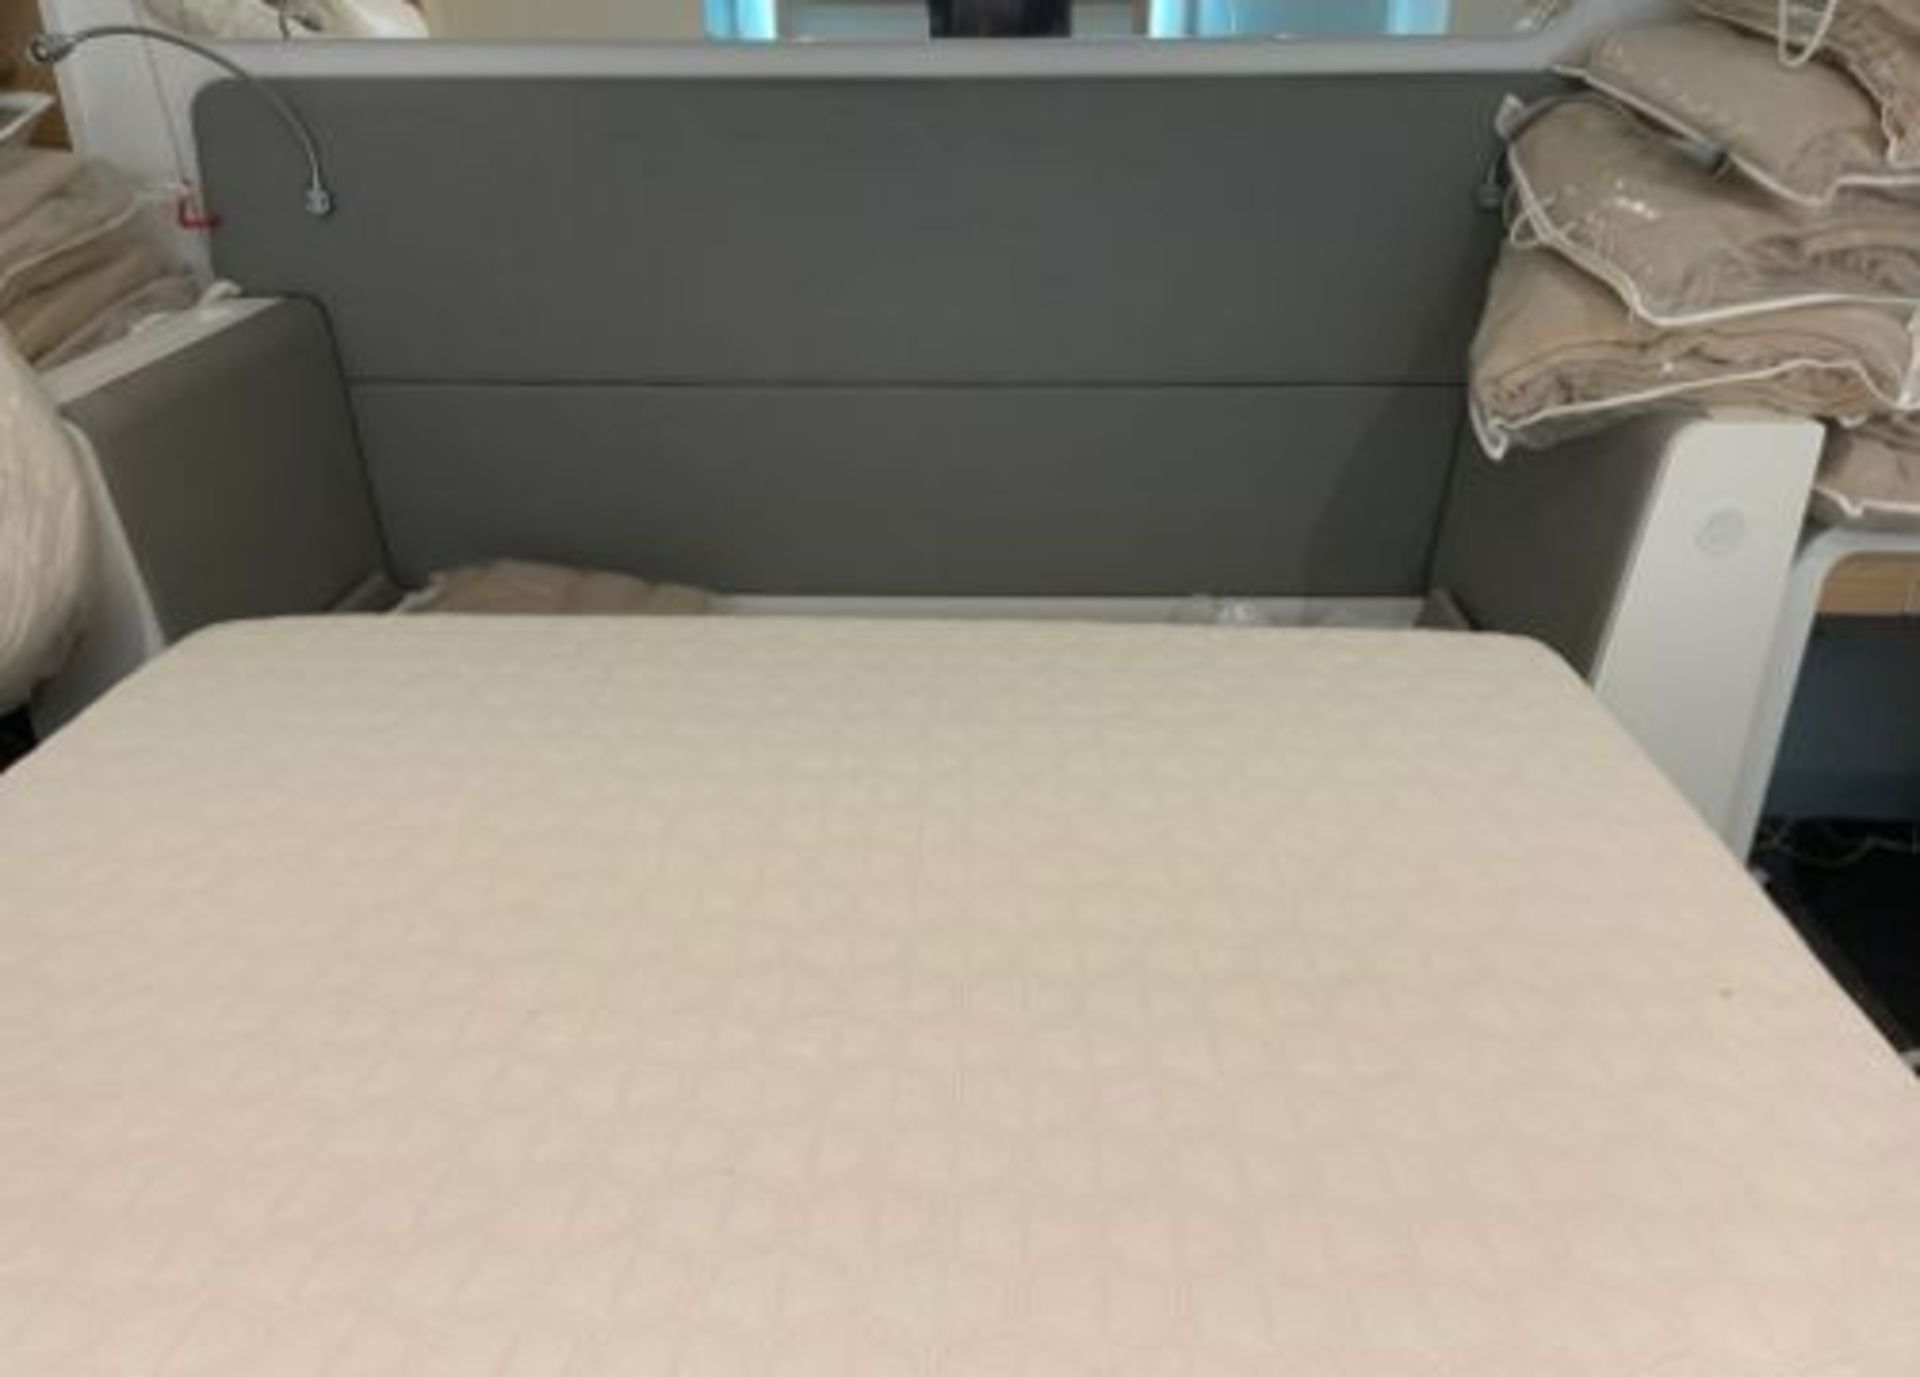 1 x Double Adjustable Space Saving Smart Bed With Serta Motion Memory Foam Mattress - Signature - Image 3 of 12